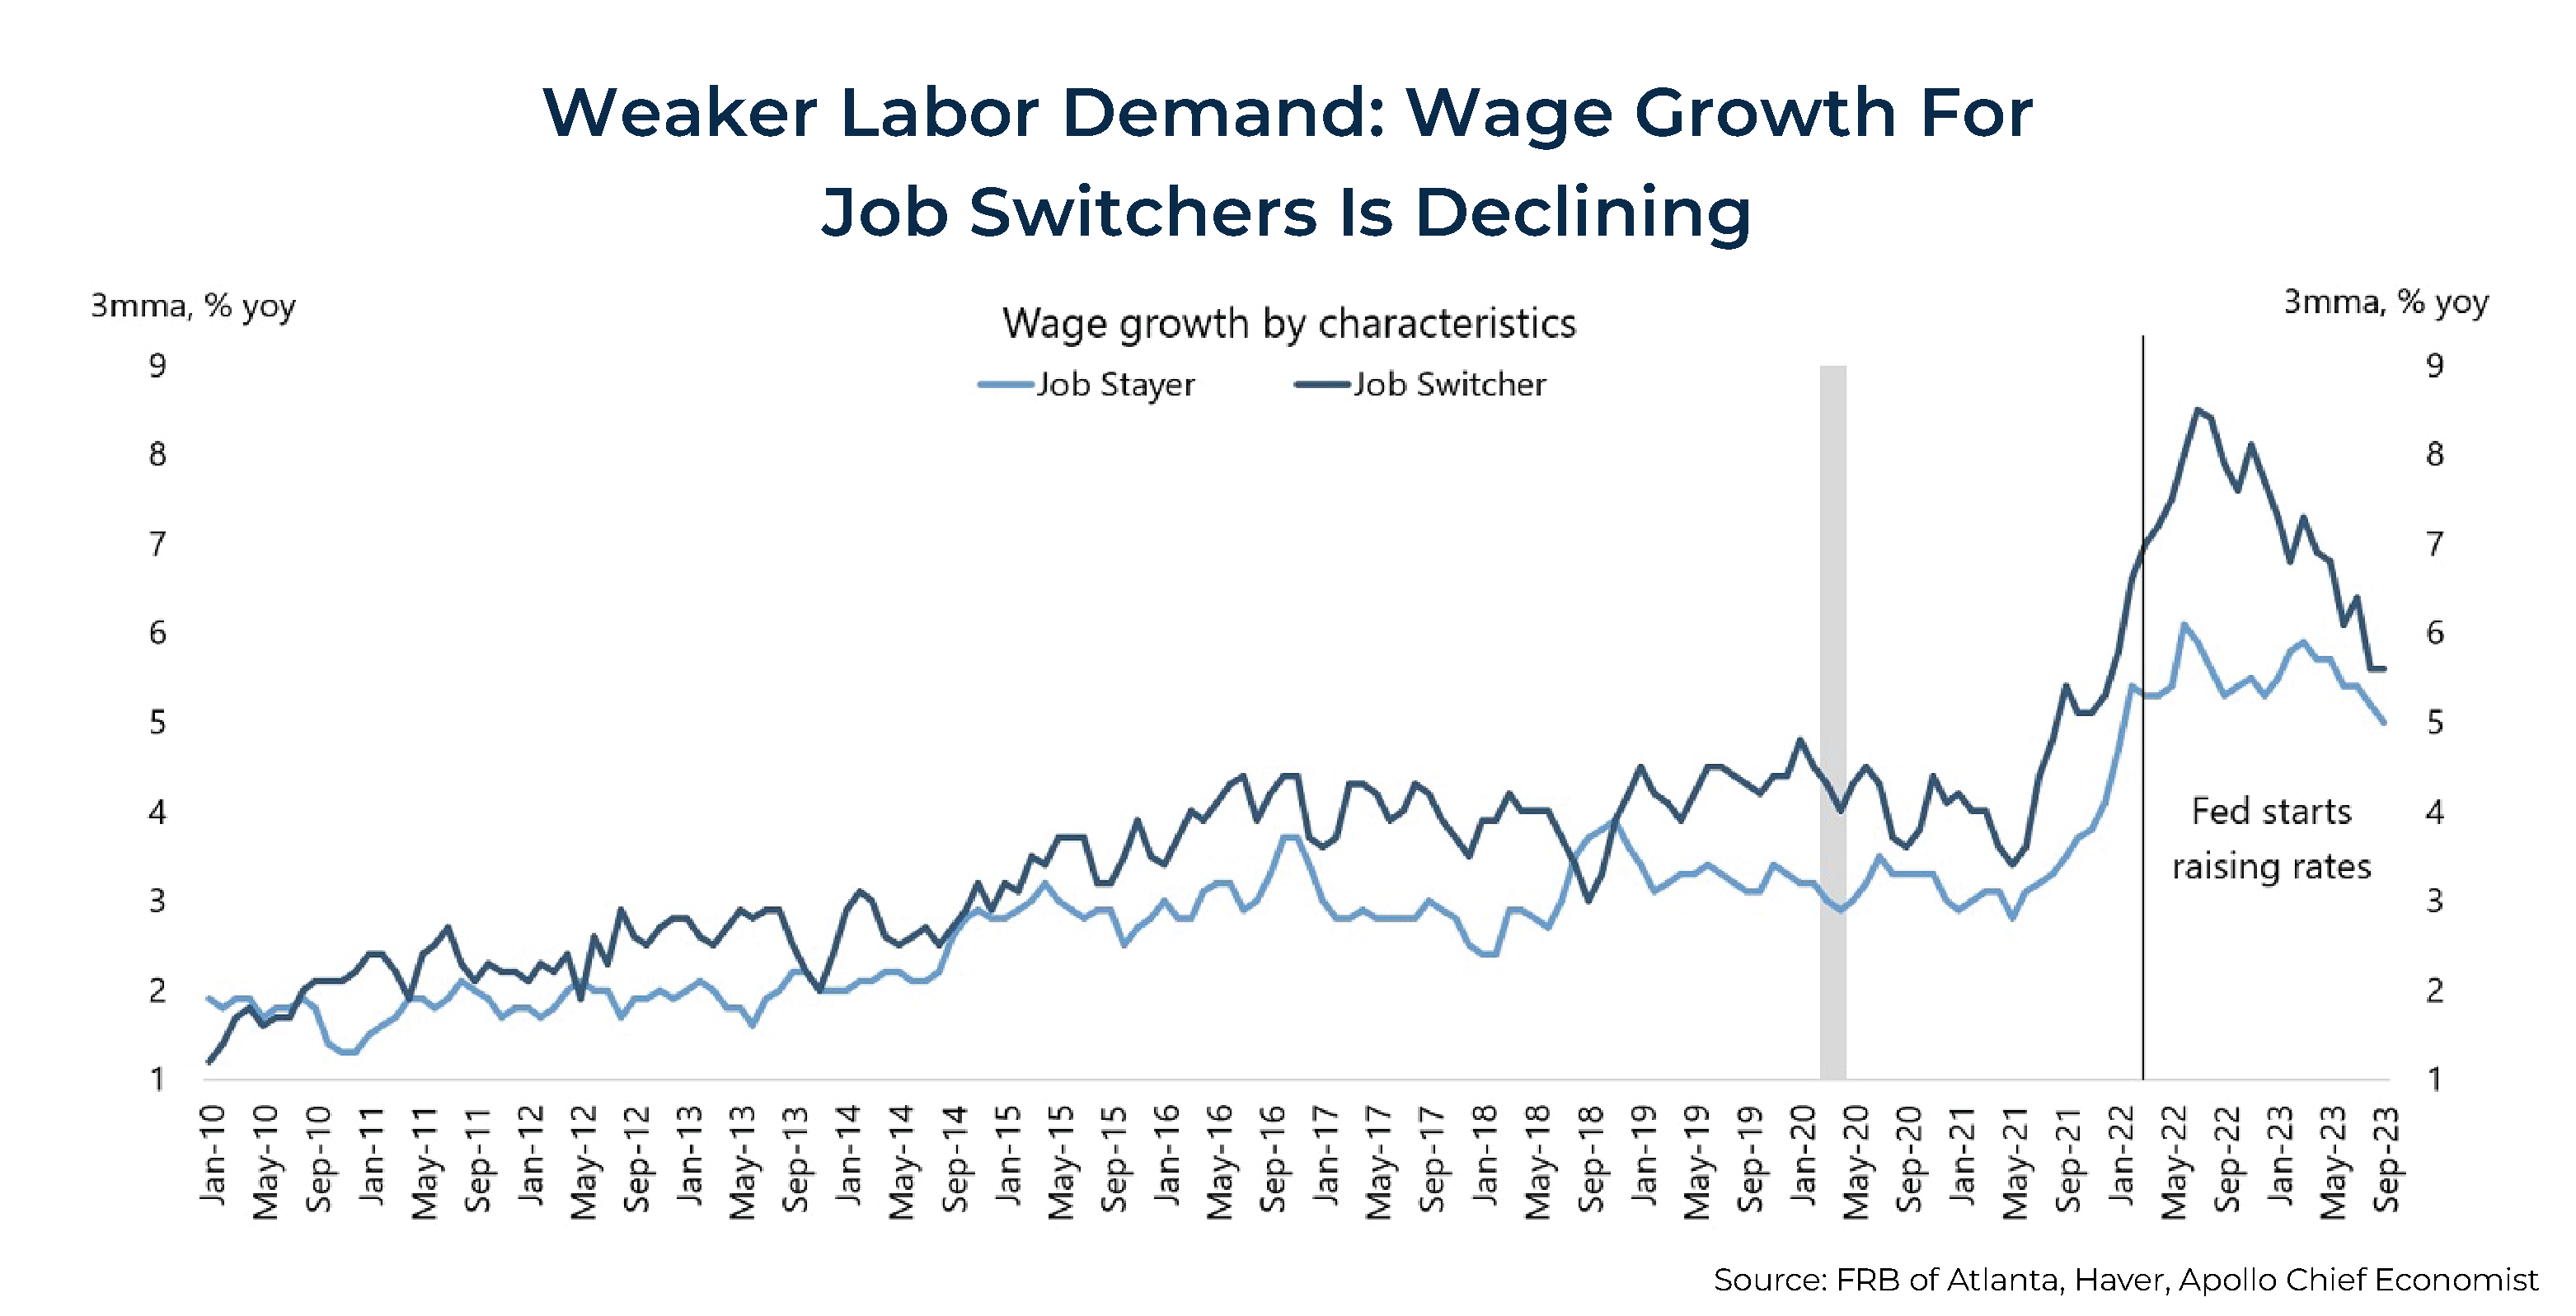 Weaker Labor Demand Wage Growth For Job Switchers Is Declining